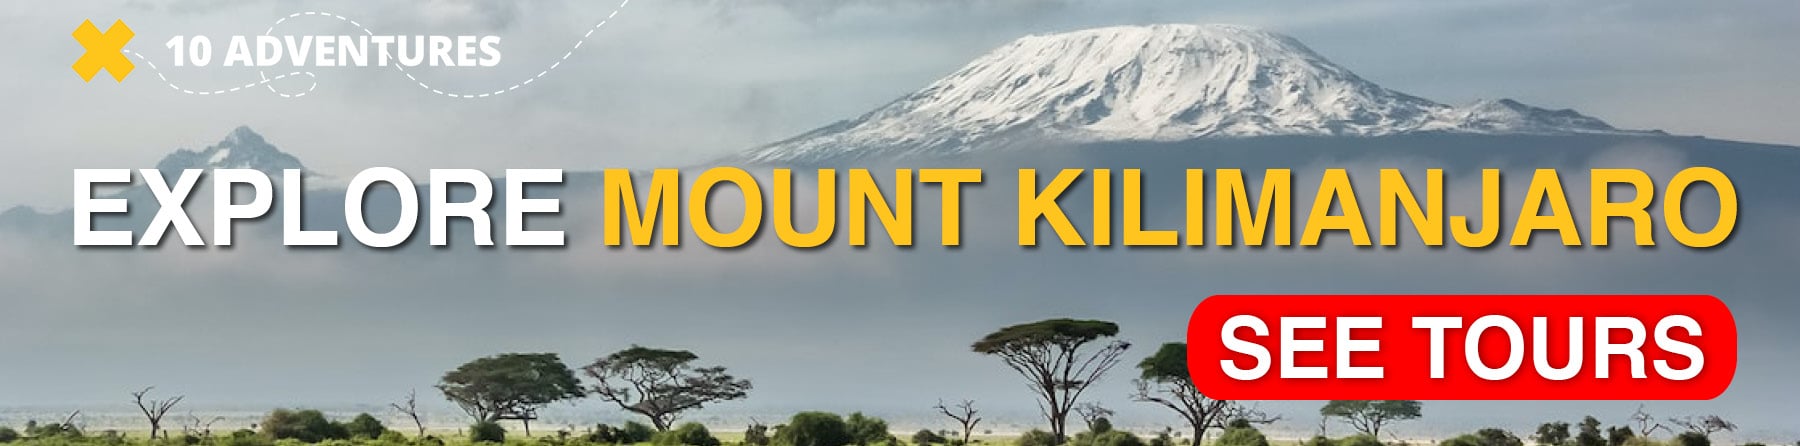 Check out these great tours in Mount Kilimanjaro Region in Africa